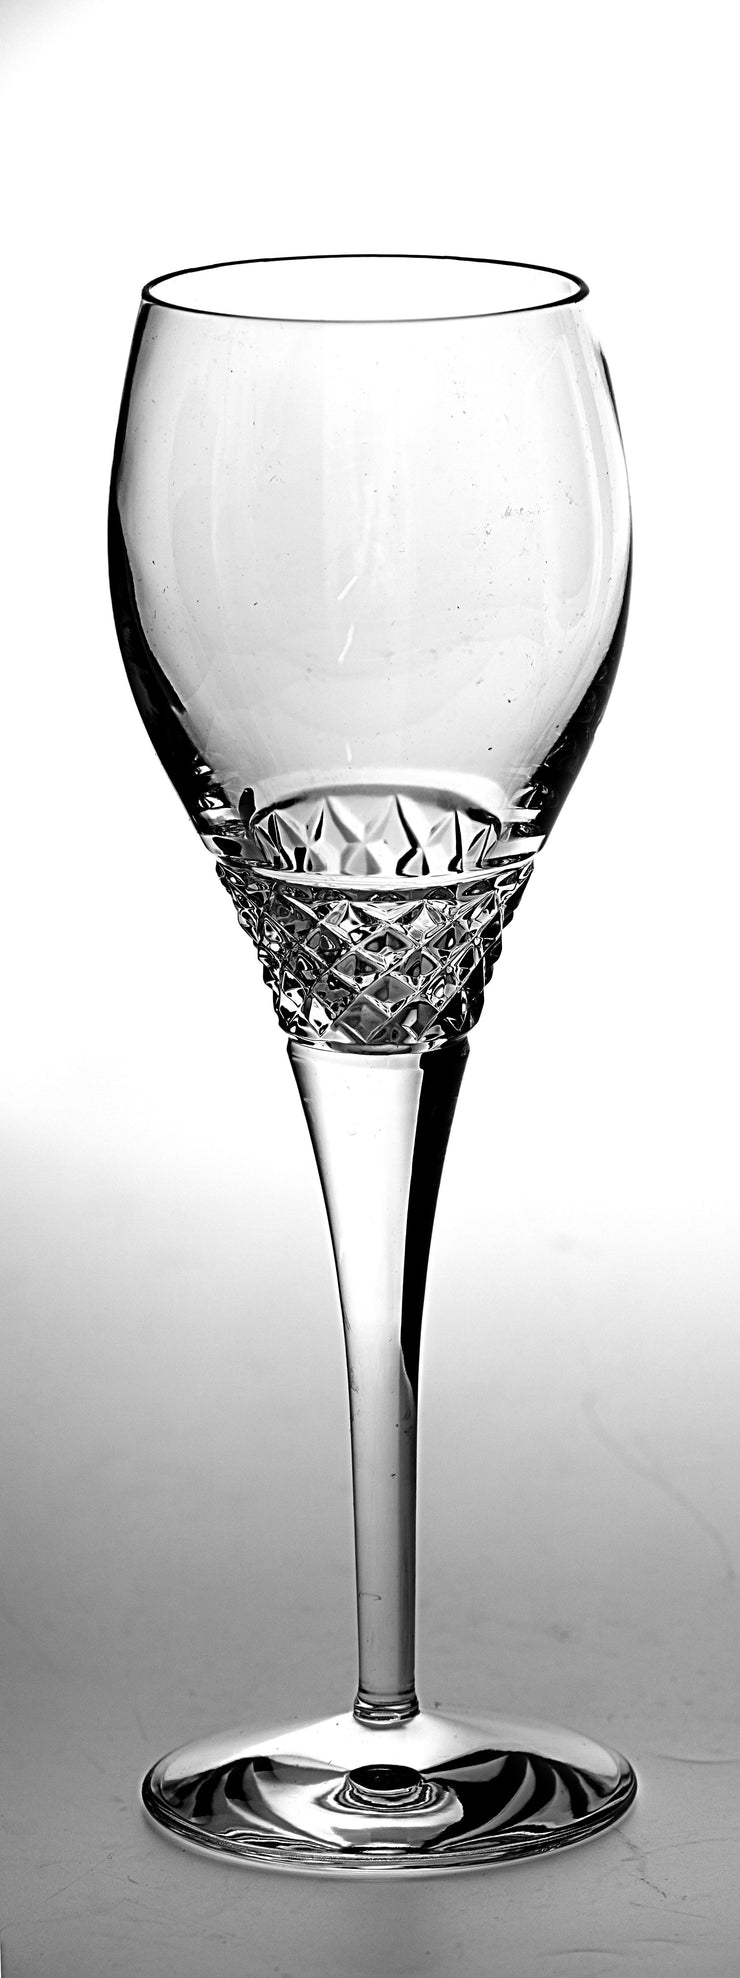 European Quality Cut Crystal Glasses - Tall - Water - Goblet - Glass is 12.75 oz. - Set of 6